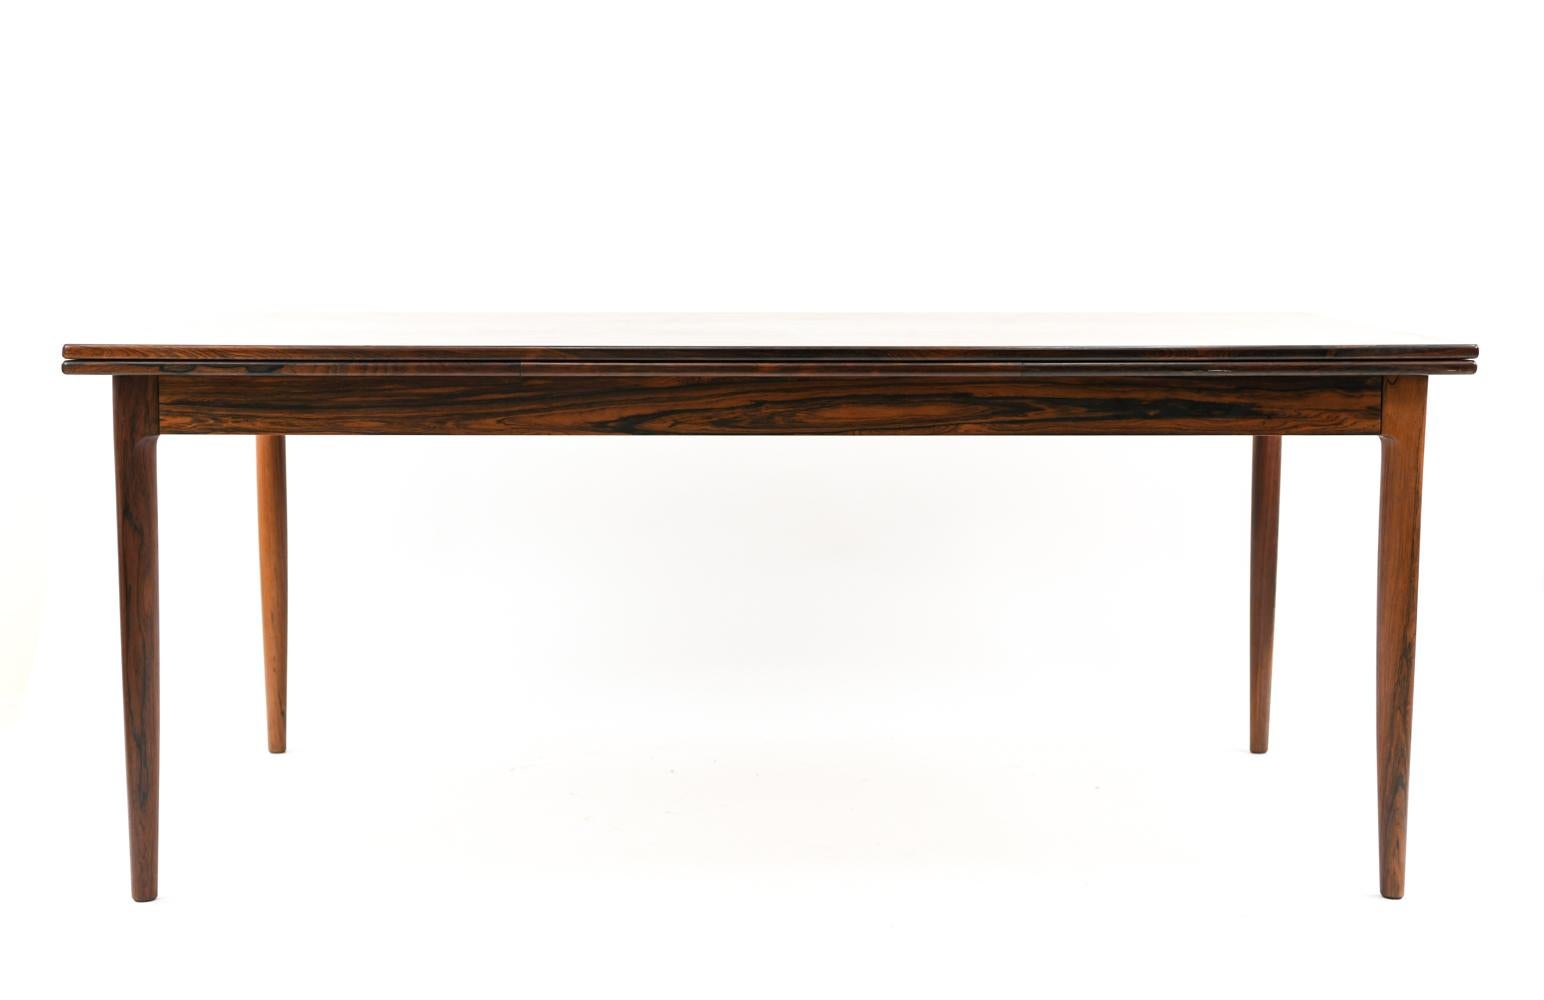 A rare, large Danish midcentury dining table designed by Niels O. Møller for J.L Møllers Møbelfabrik, circa 1960s, in rosewood with a bookmatched veneered rosewood top. A clean, refined rectangular form with rounded, tapered legs give this piece a